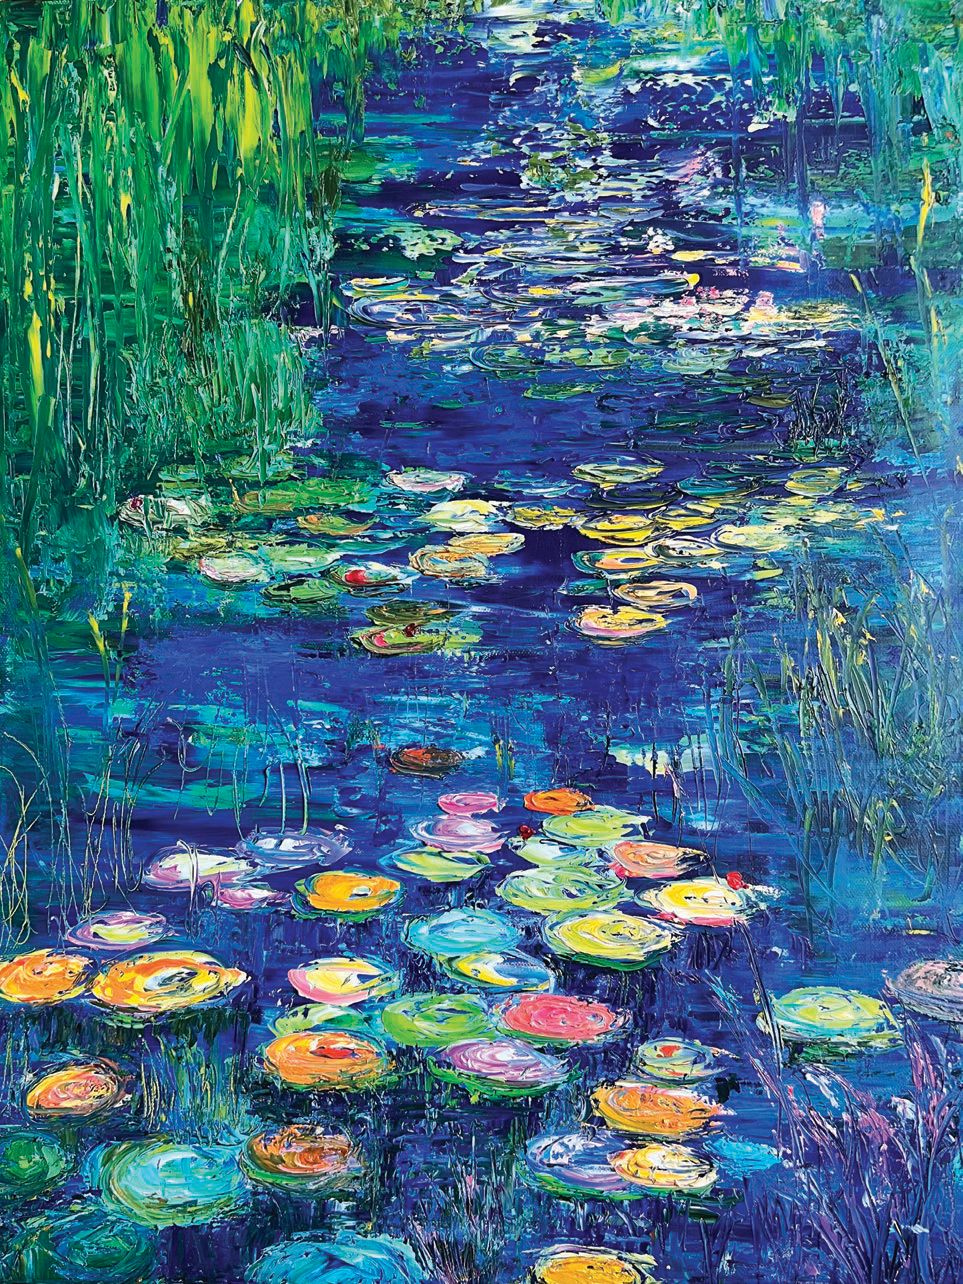 Maria-Victoria Checa, “Blue Lily River” PHOTO COURTESY OF THE ARTISTS